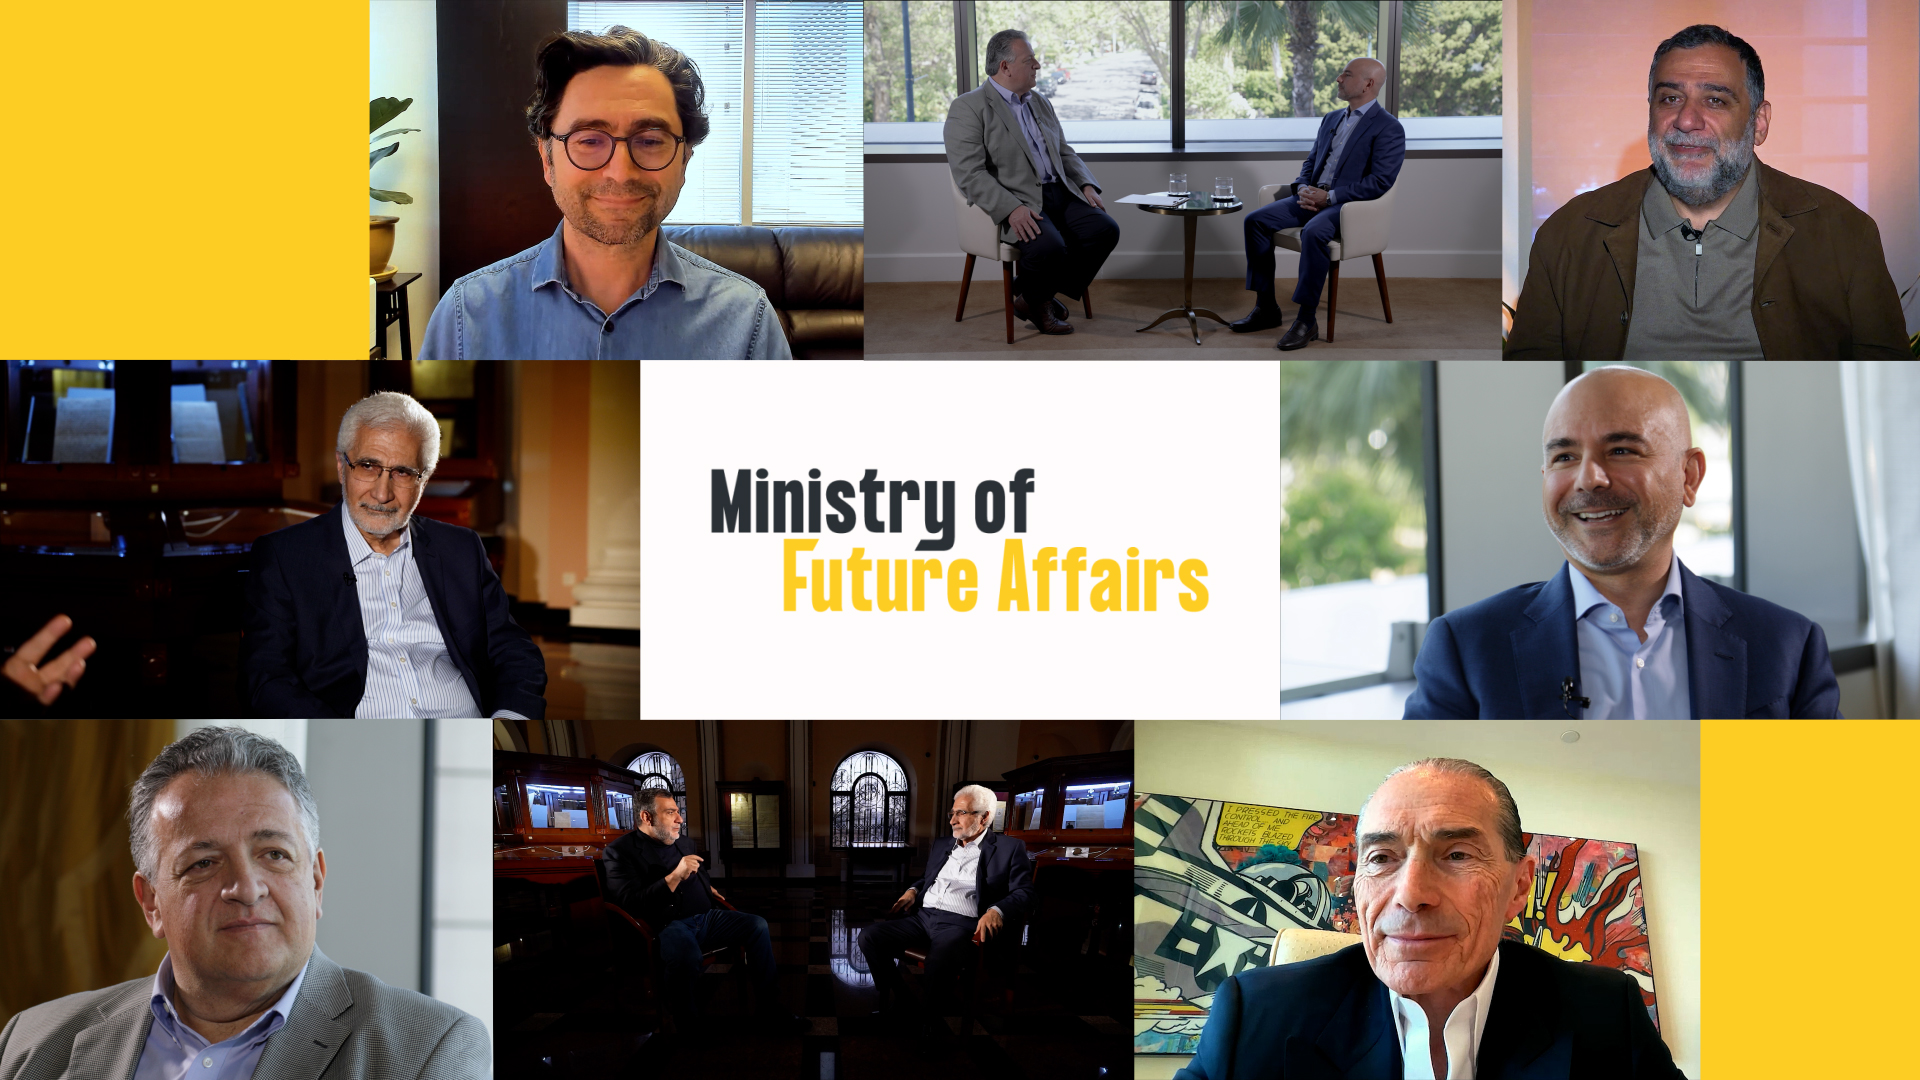 MINISTRY OF FUTURE AFFAIRS: ARMENIA 2041 Launches New Interview Series